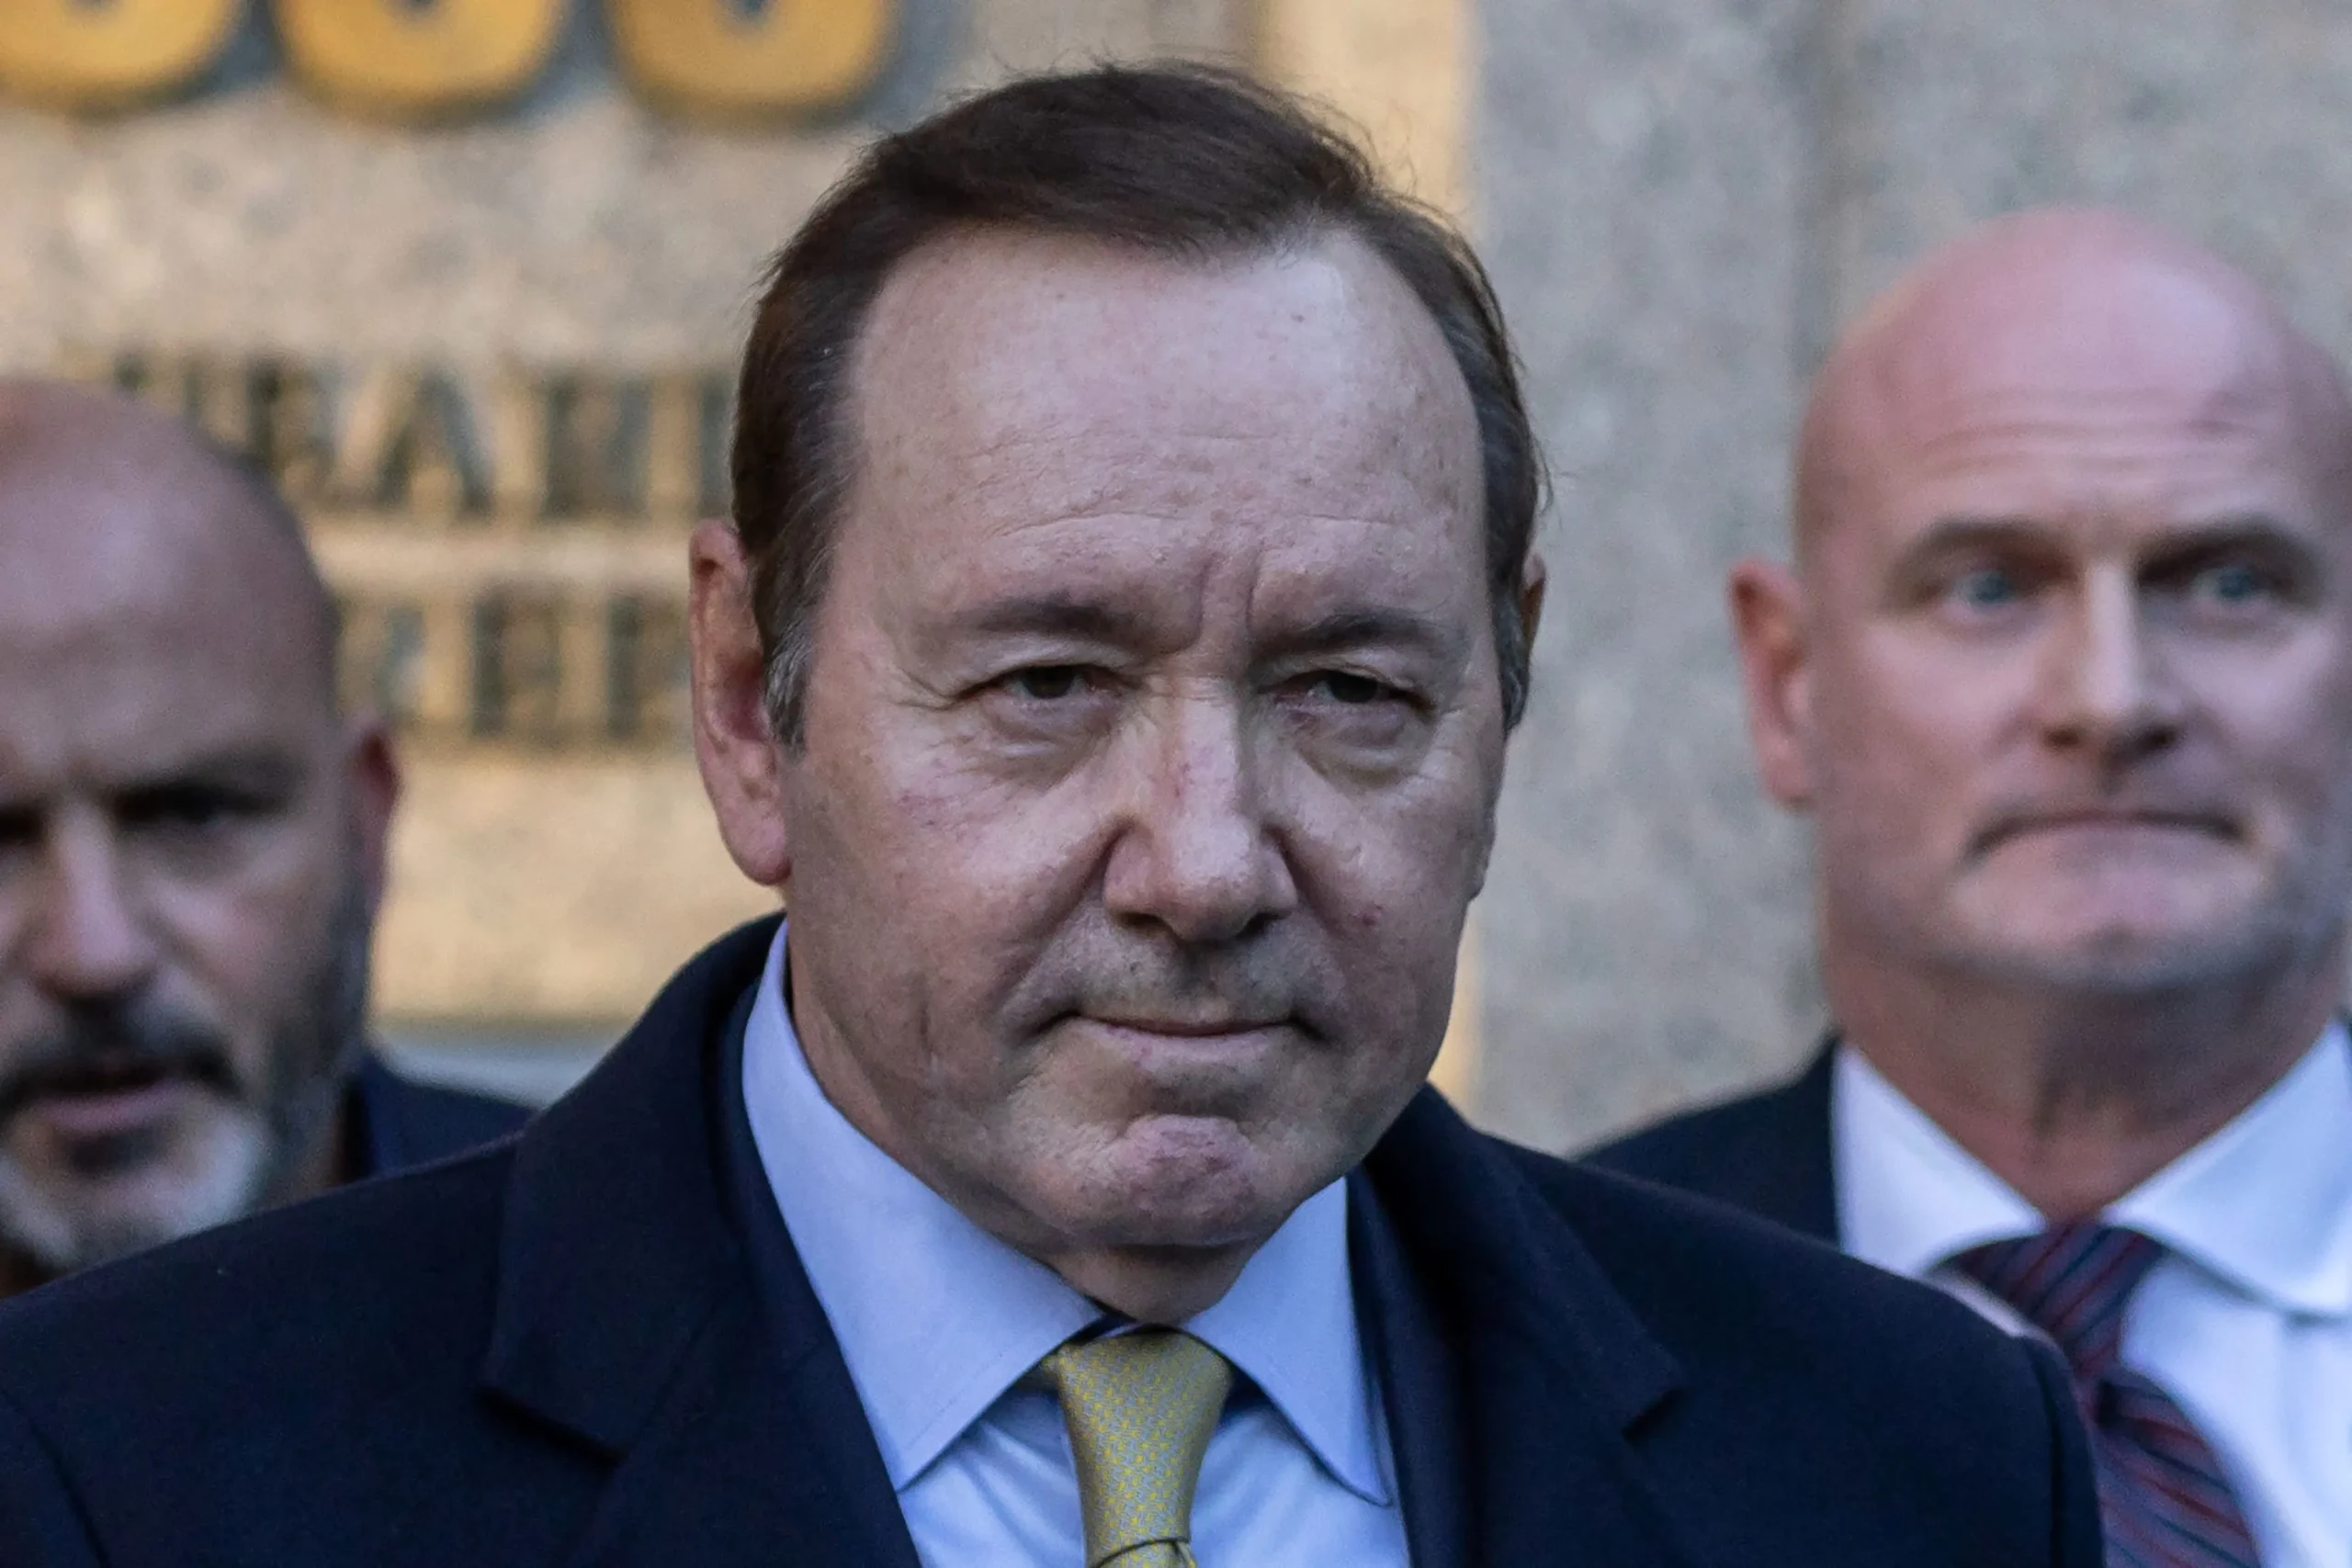 Kevin Spacey Arrives At Southwark Crown Court To Face 12 Sexual Assault Charges, Sporting A Smiling Demeanor